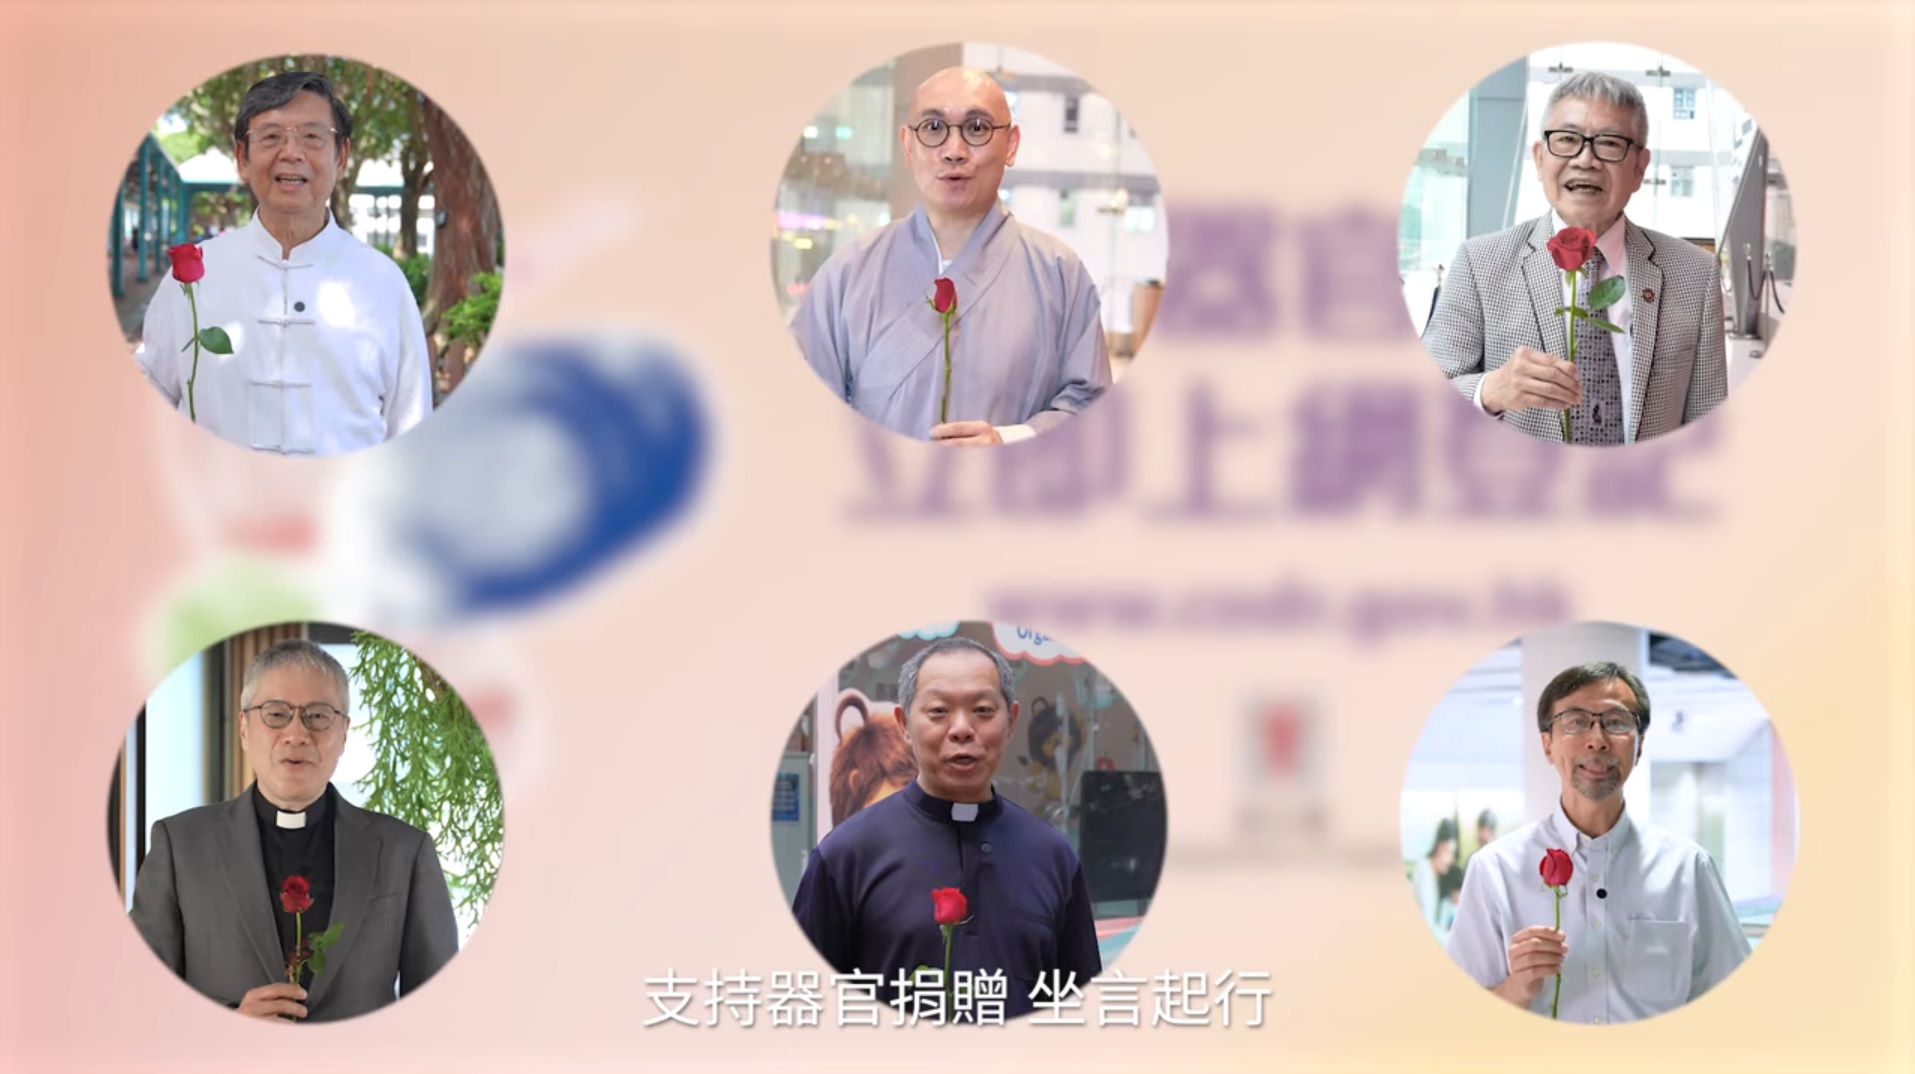 Appeal Video by Representatives from Religious Groups (Chinese version only)